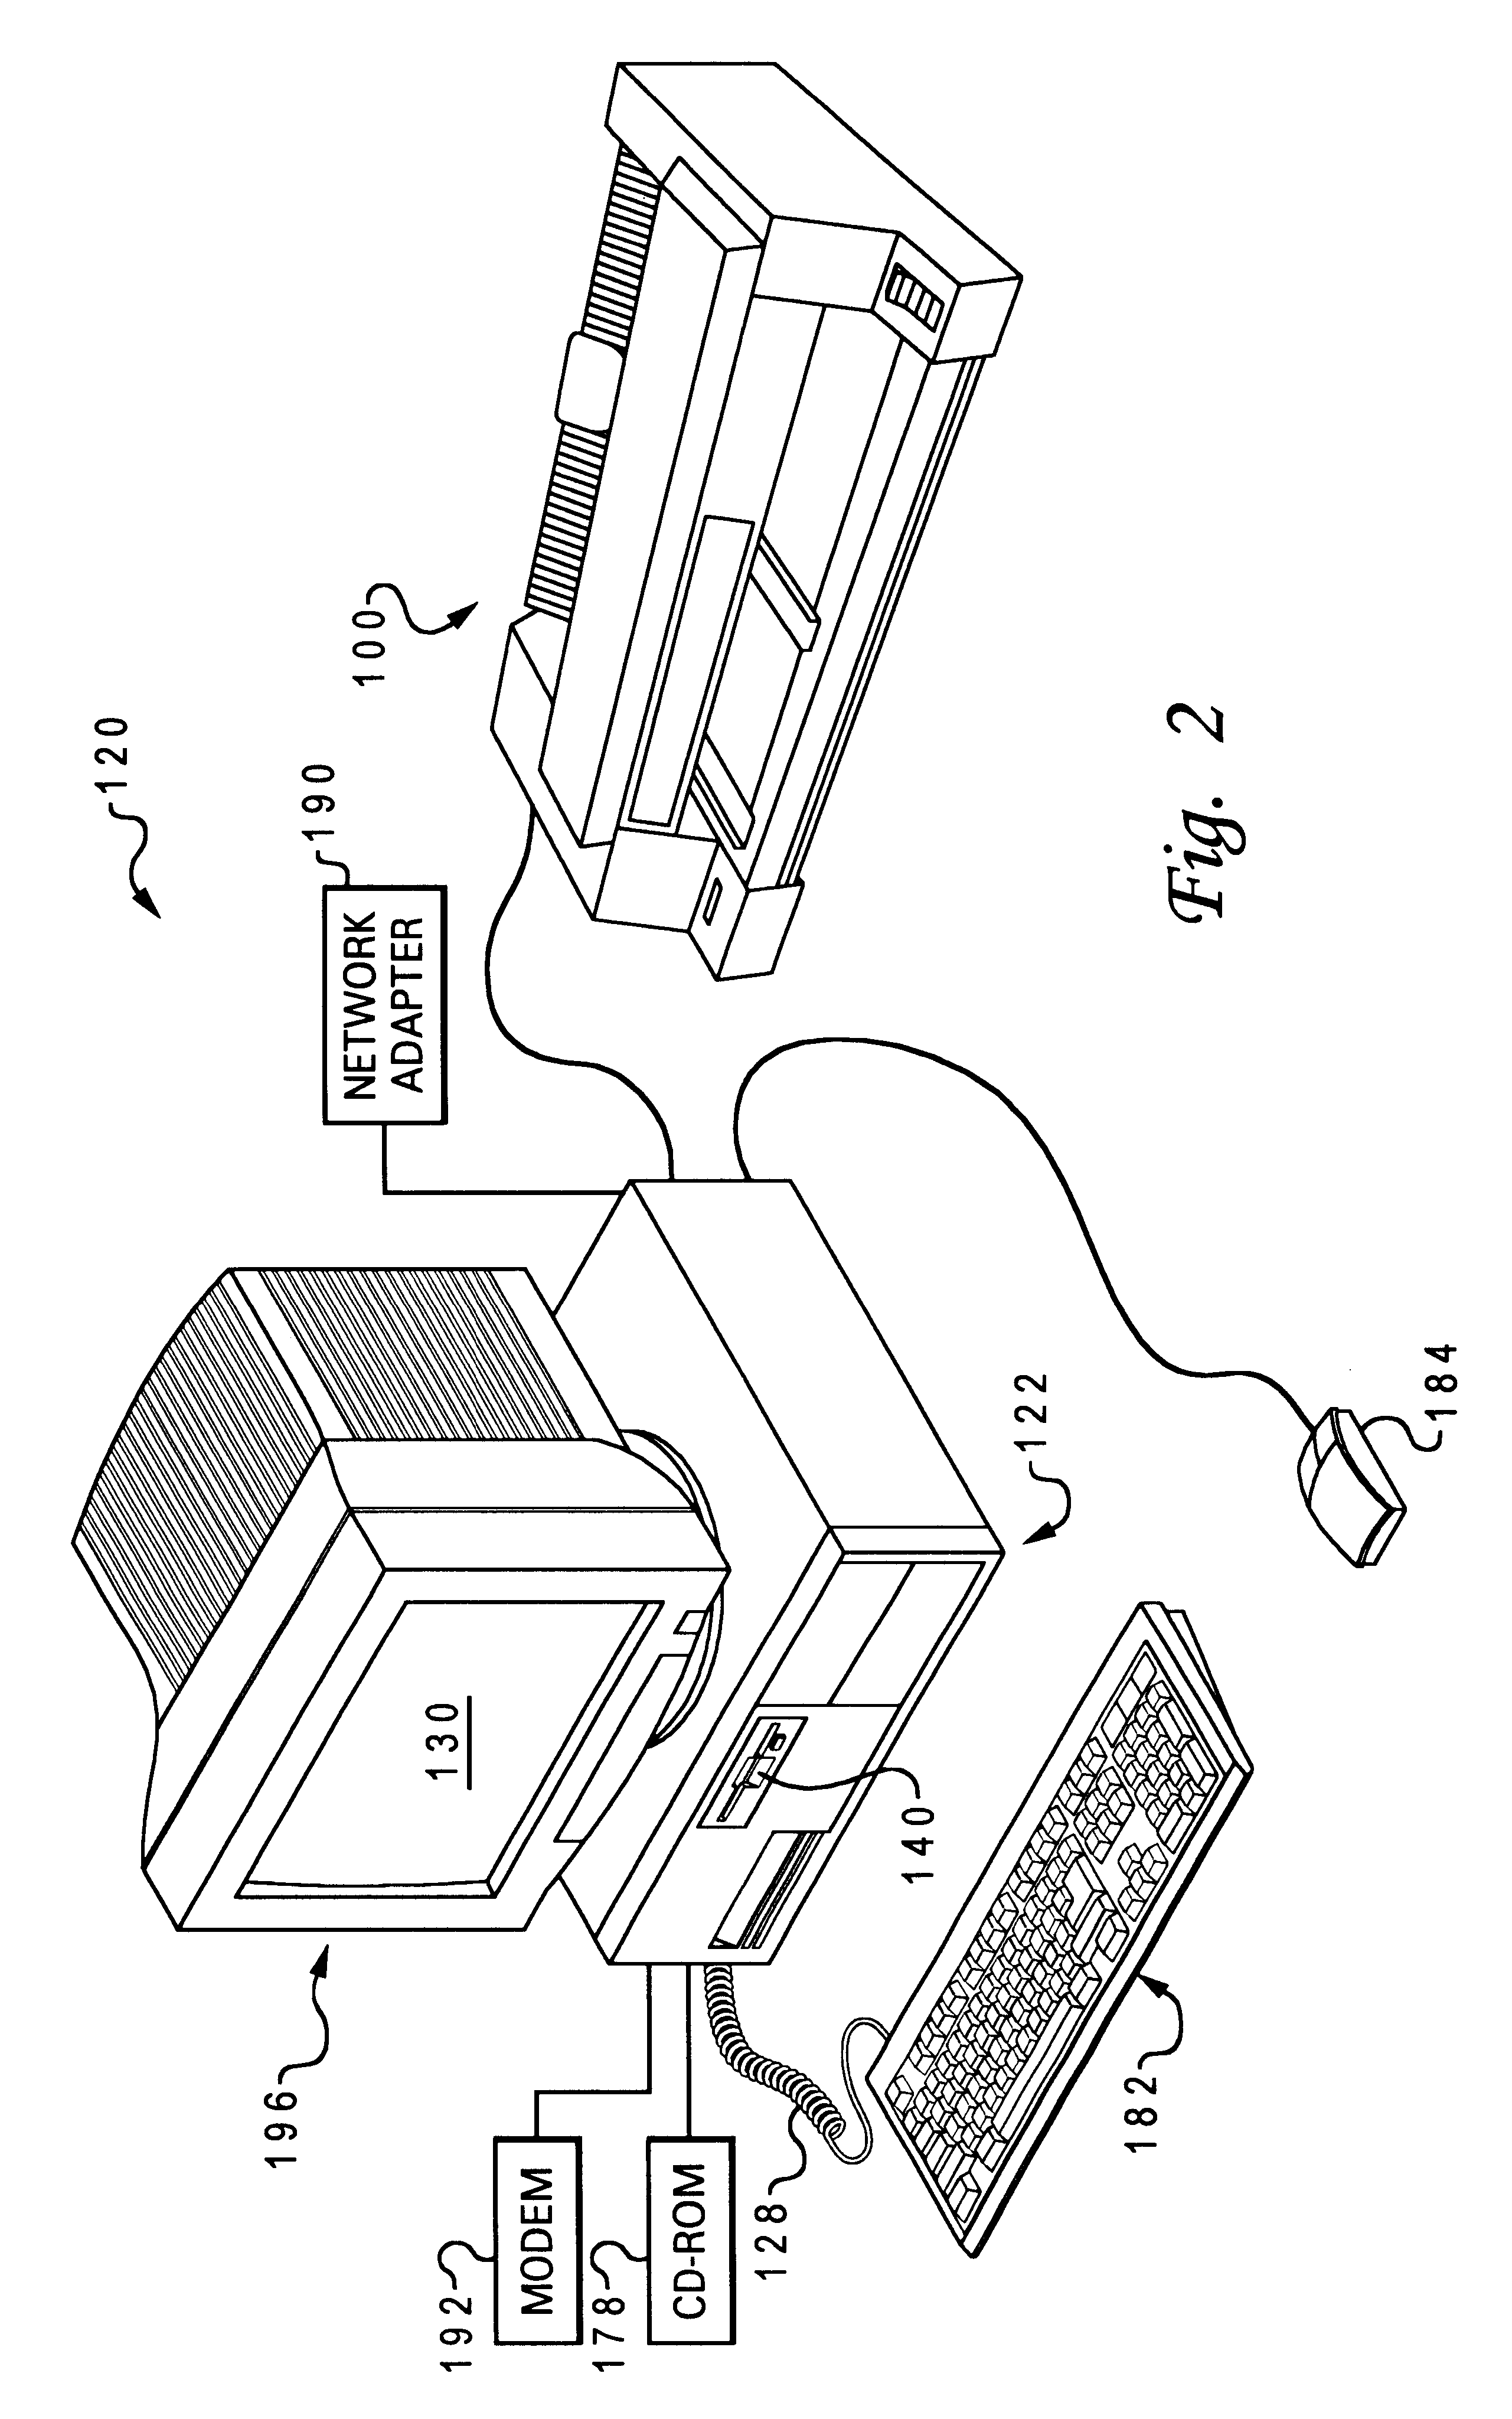 Mechanism for high performance transfer of speculative request data between levels of cache hierarchy